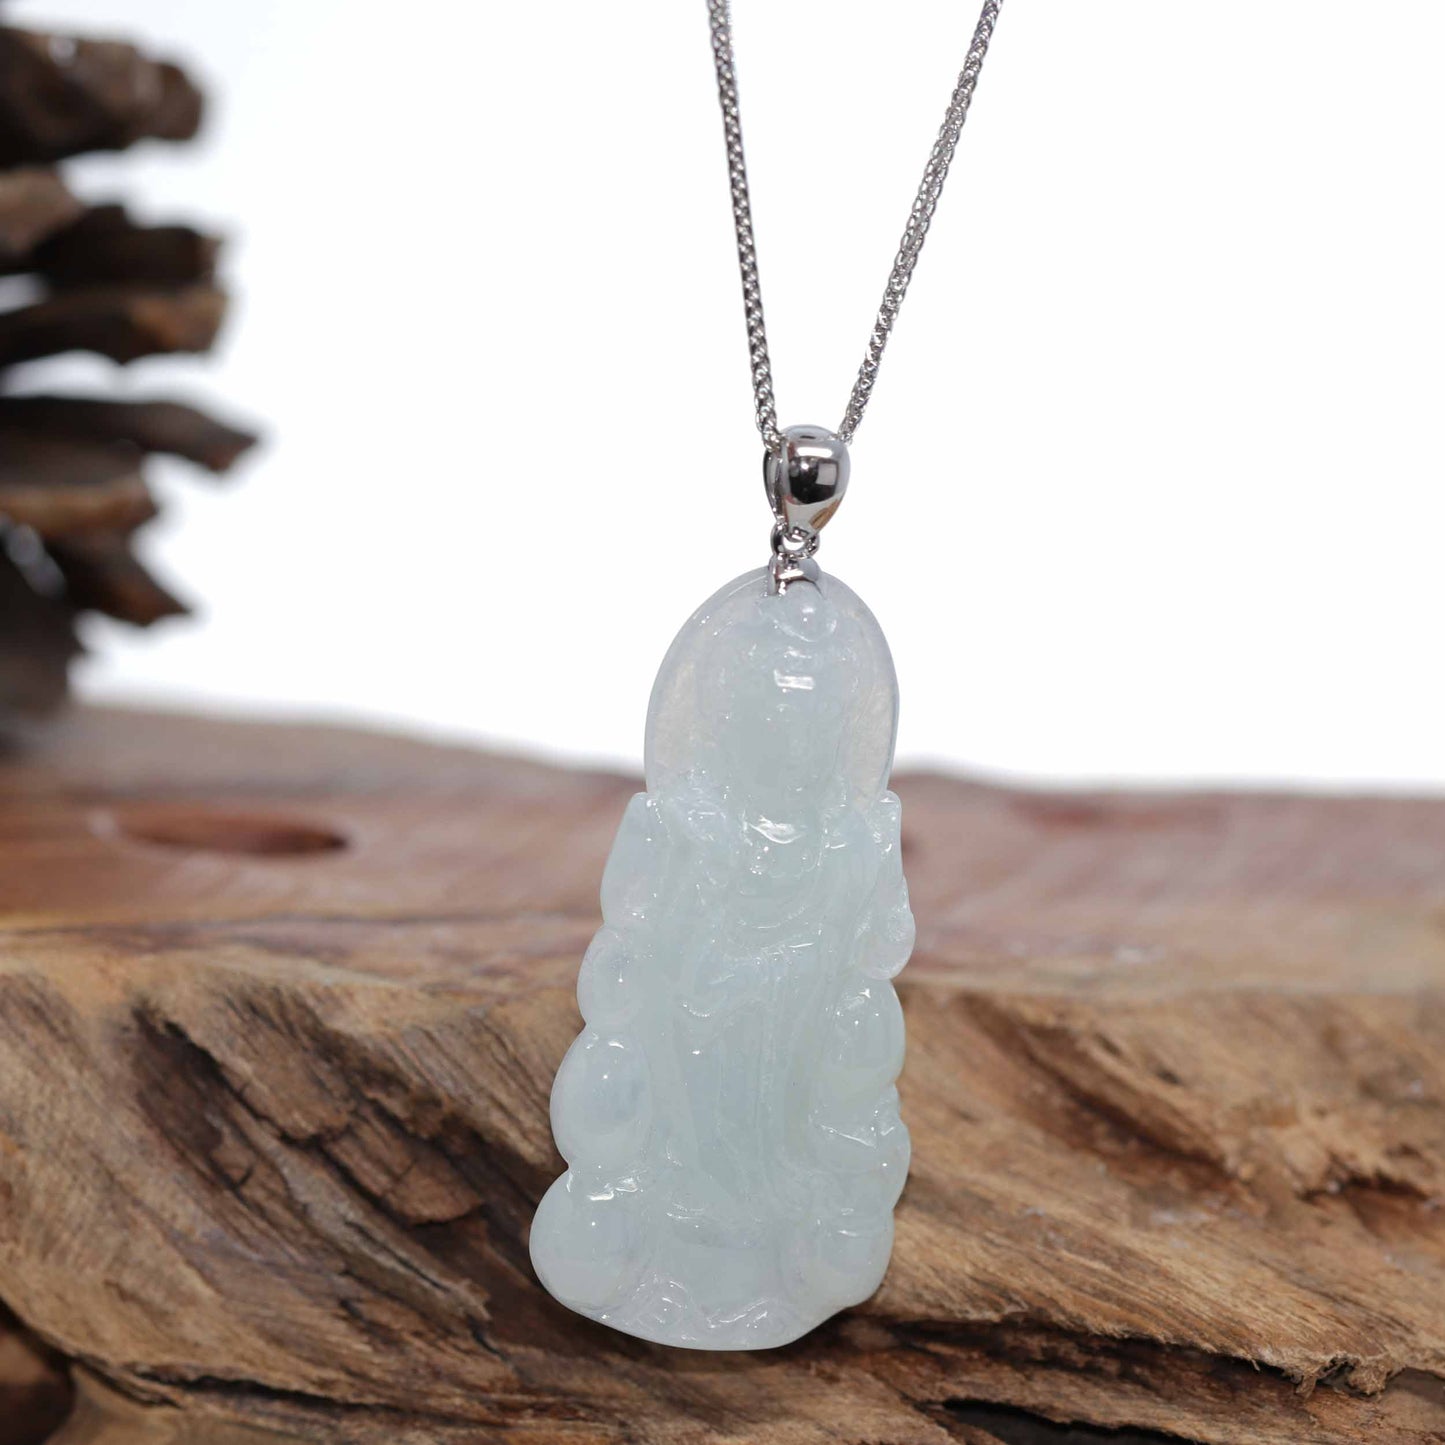 RealJade¨ 14k White Gold "Goddess of Compassion" Genuine Ice Burmese Jadeite Jade Guanyin Necklace With Gold Bail